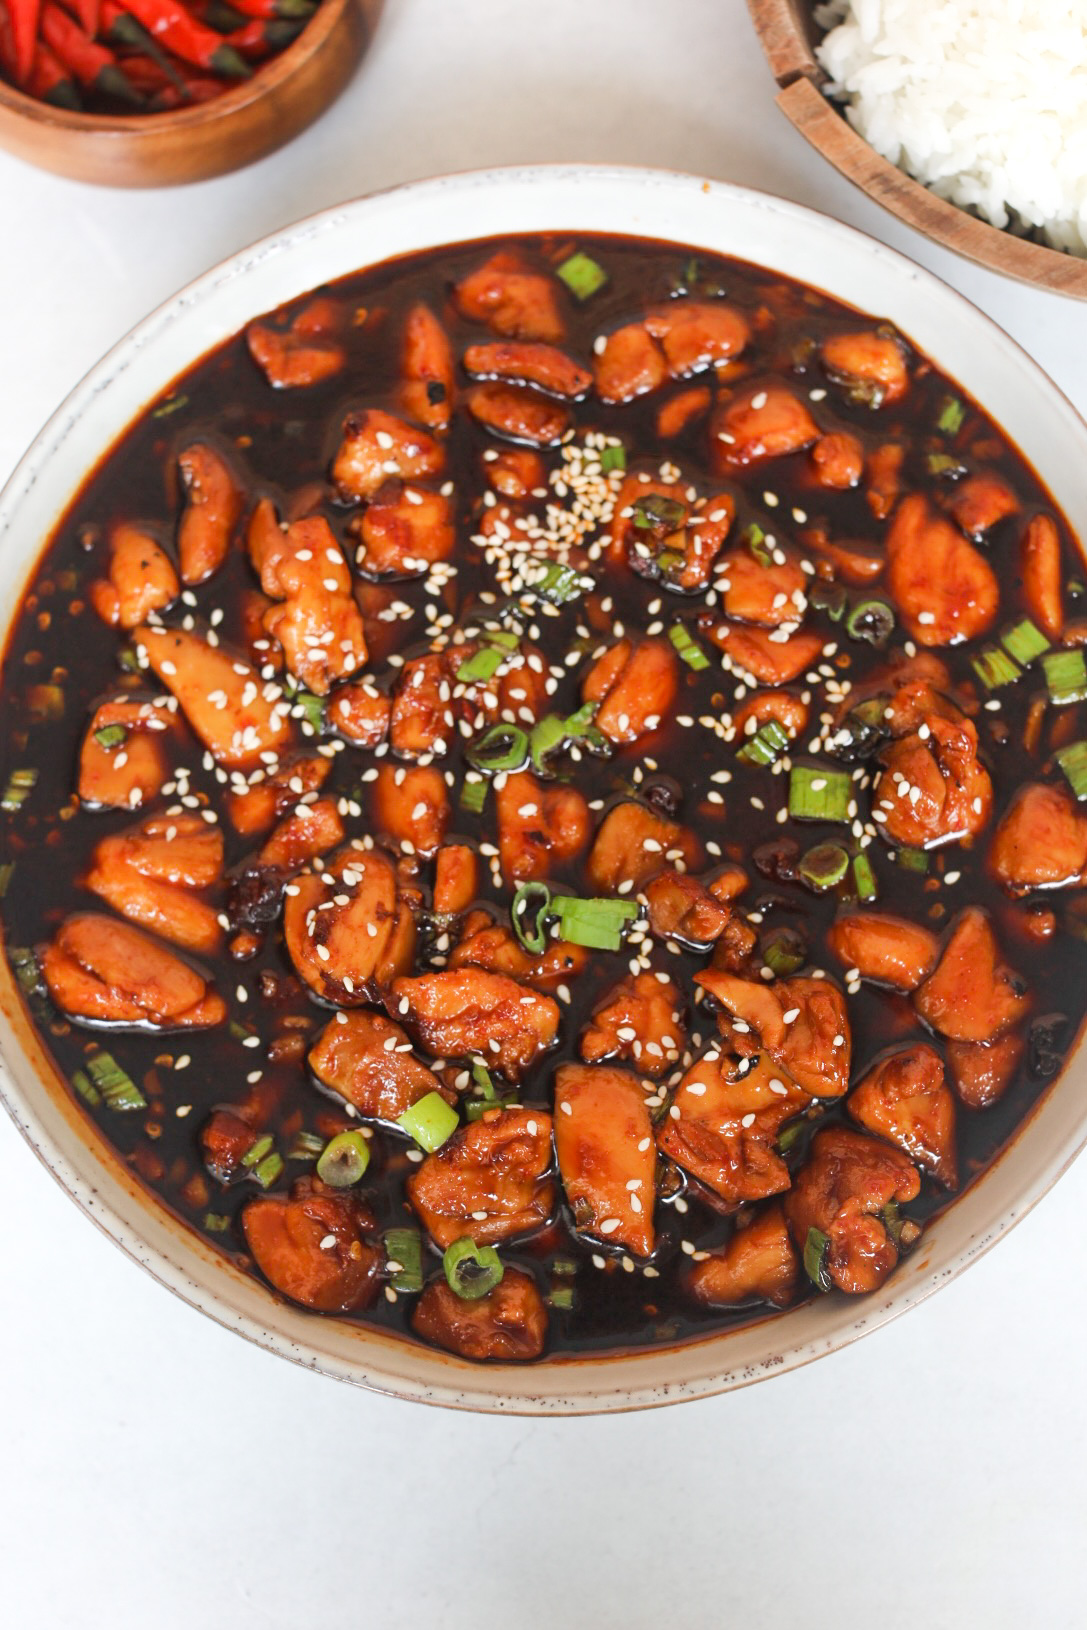 Spicy Chicken Teriyaki in a large serving bowl topped with sesame seeds and green onions. White rice in a wooden bowl and red chili peppers in a small wooden bowl is added for styling purposes in the top left and right corners of the image.